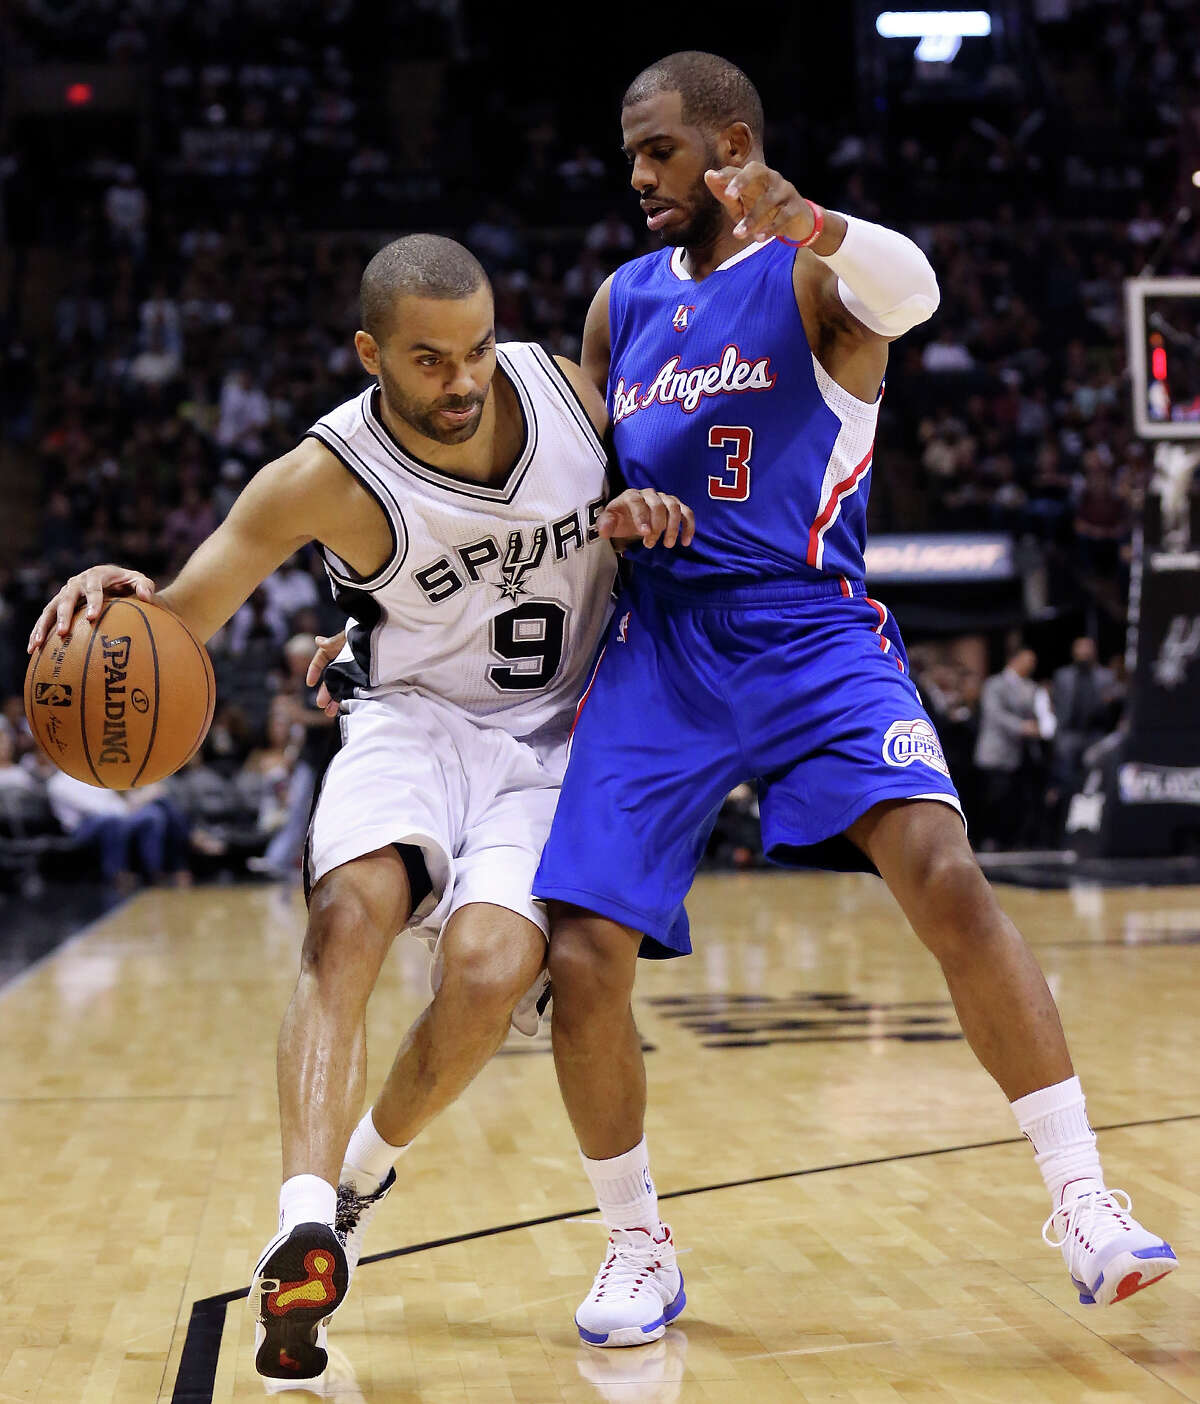 San Antonio Spurs’ Tony Parker looks for room around Los Angeles Clippers’ Chris Paul during second half action in Game 6 of the first round of the Western Conference playoffs Thursday April 30, 2015 at the AT&T Center. The Clippers won 102-96.